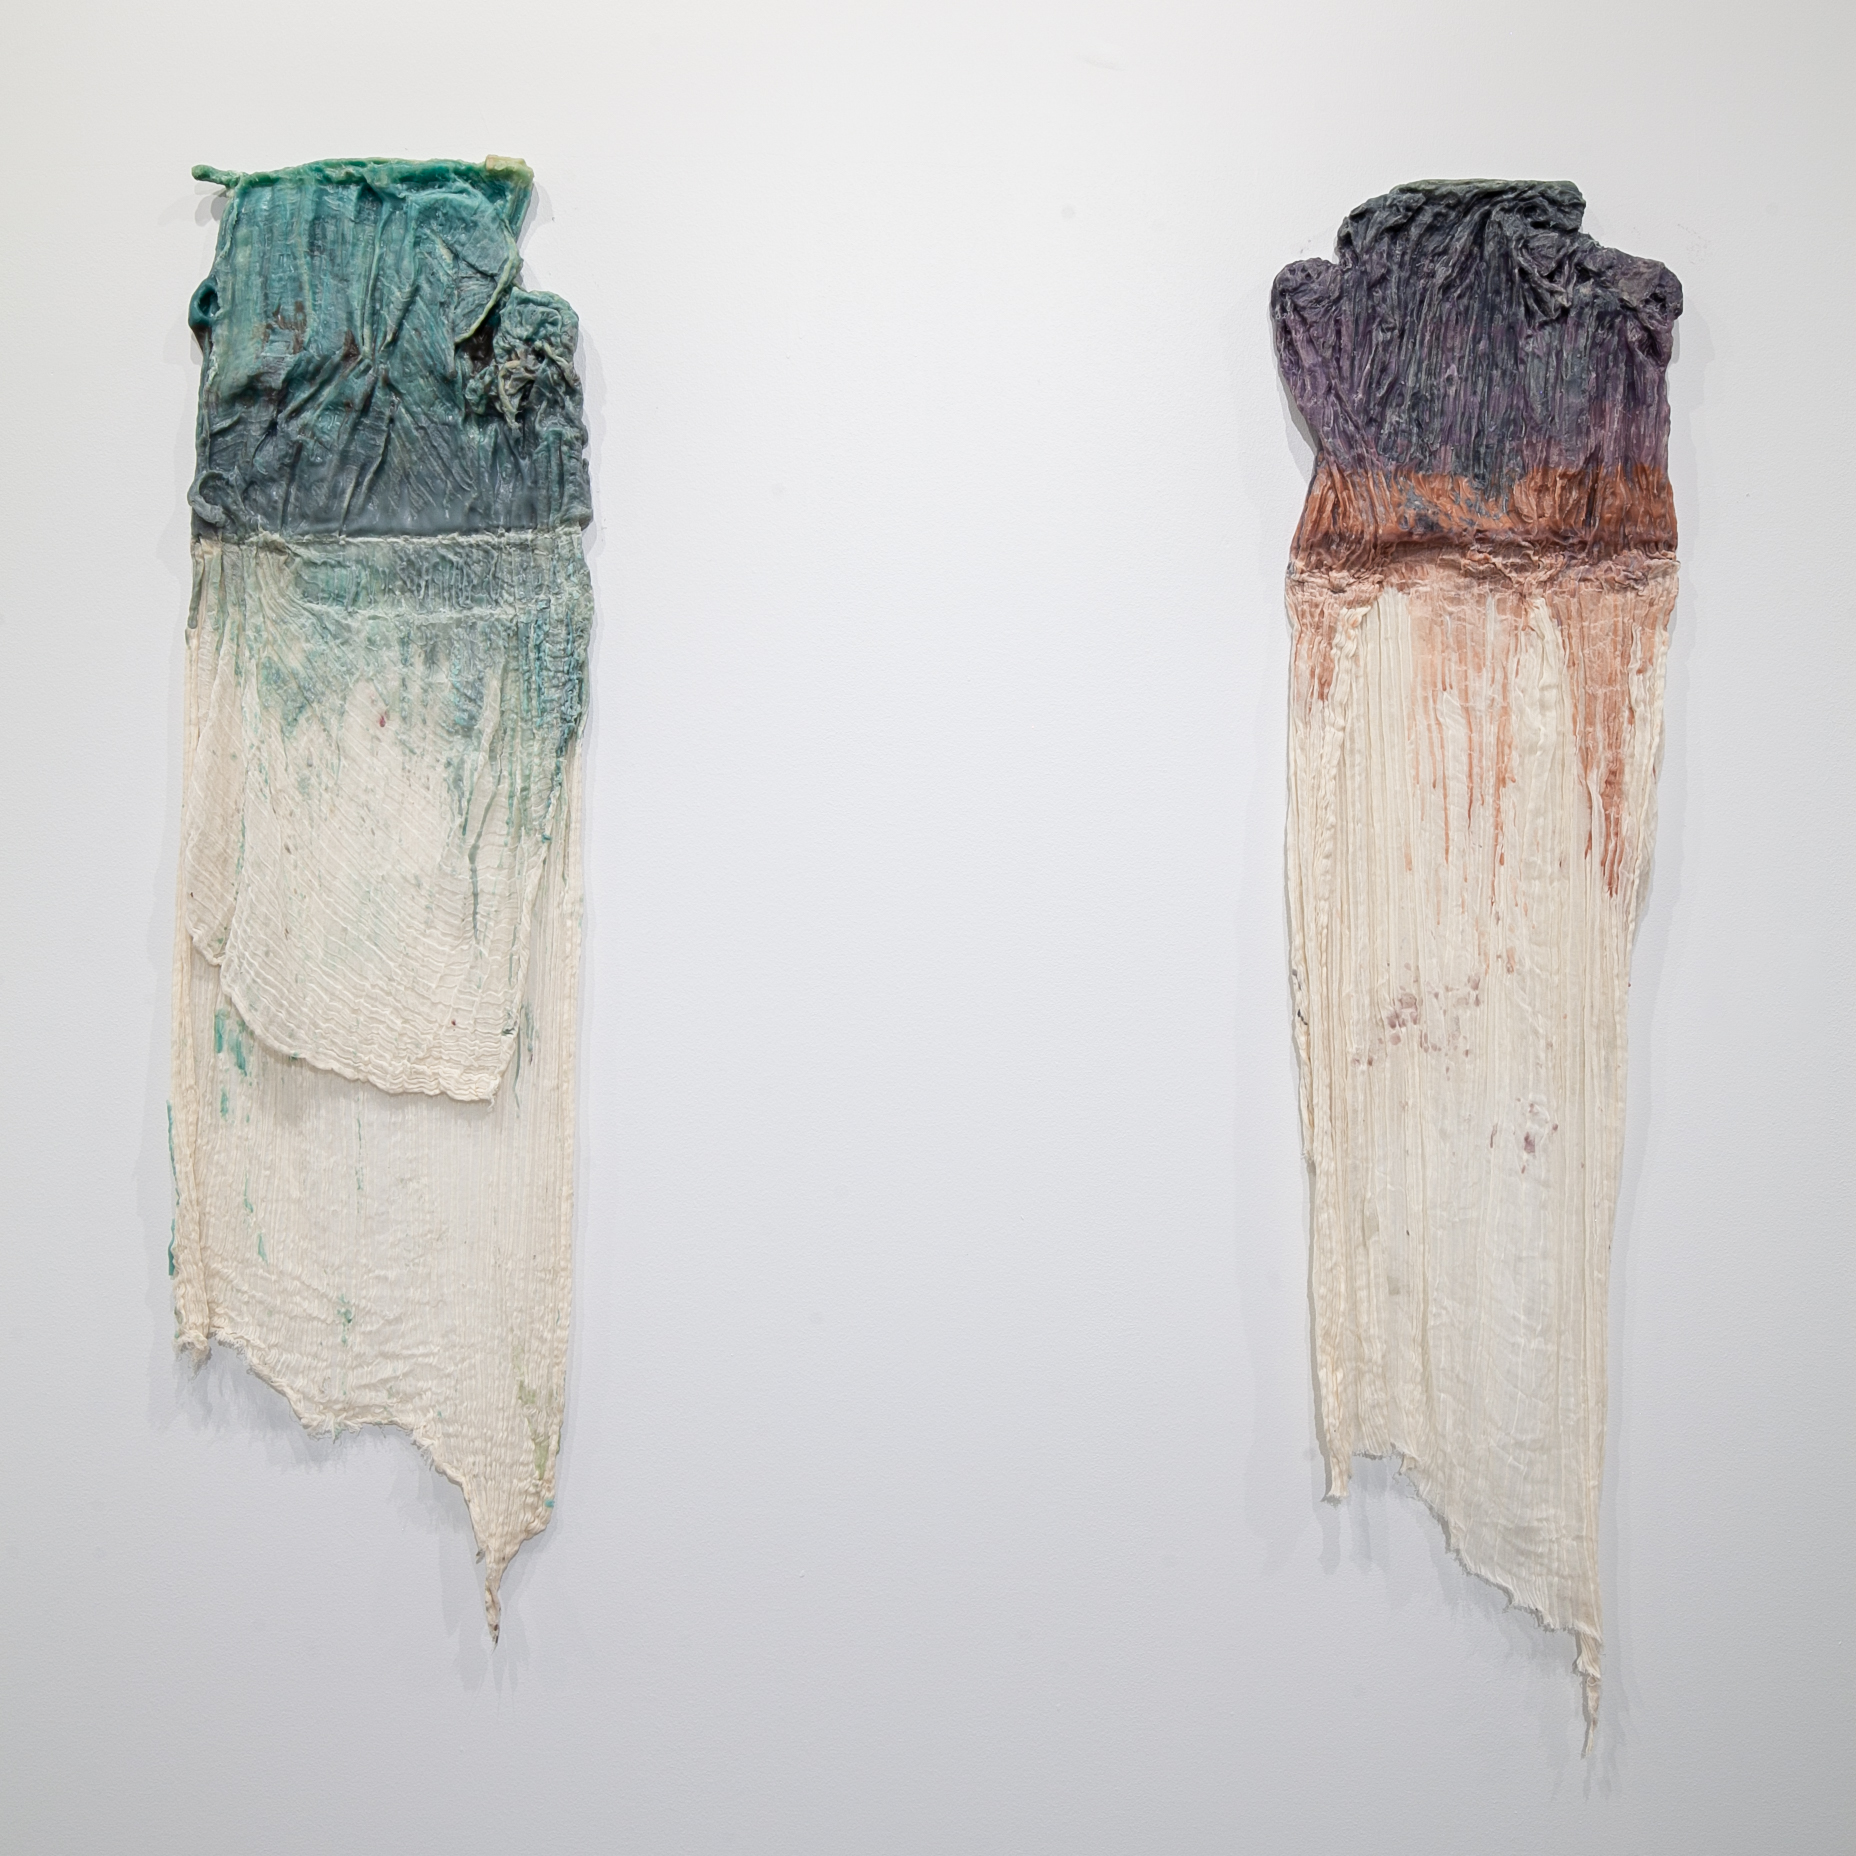  Lacy Mitcham Veteto (Memphis, TN)   Soft Skeleton  (Diptych), 2018  Medium: Cheesecloth and wax  Dimensions: 63x30 inches each    “ Soft Skeleton  was made through a process of casting and carving wax to expose the internal structure of undulating f